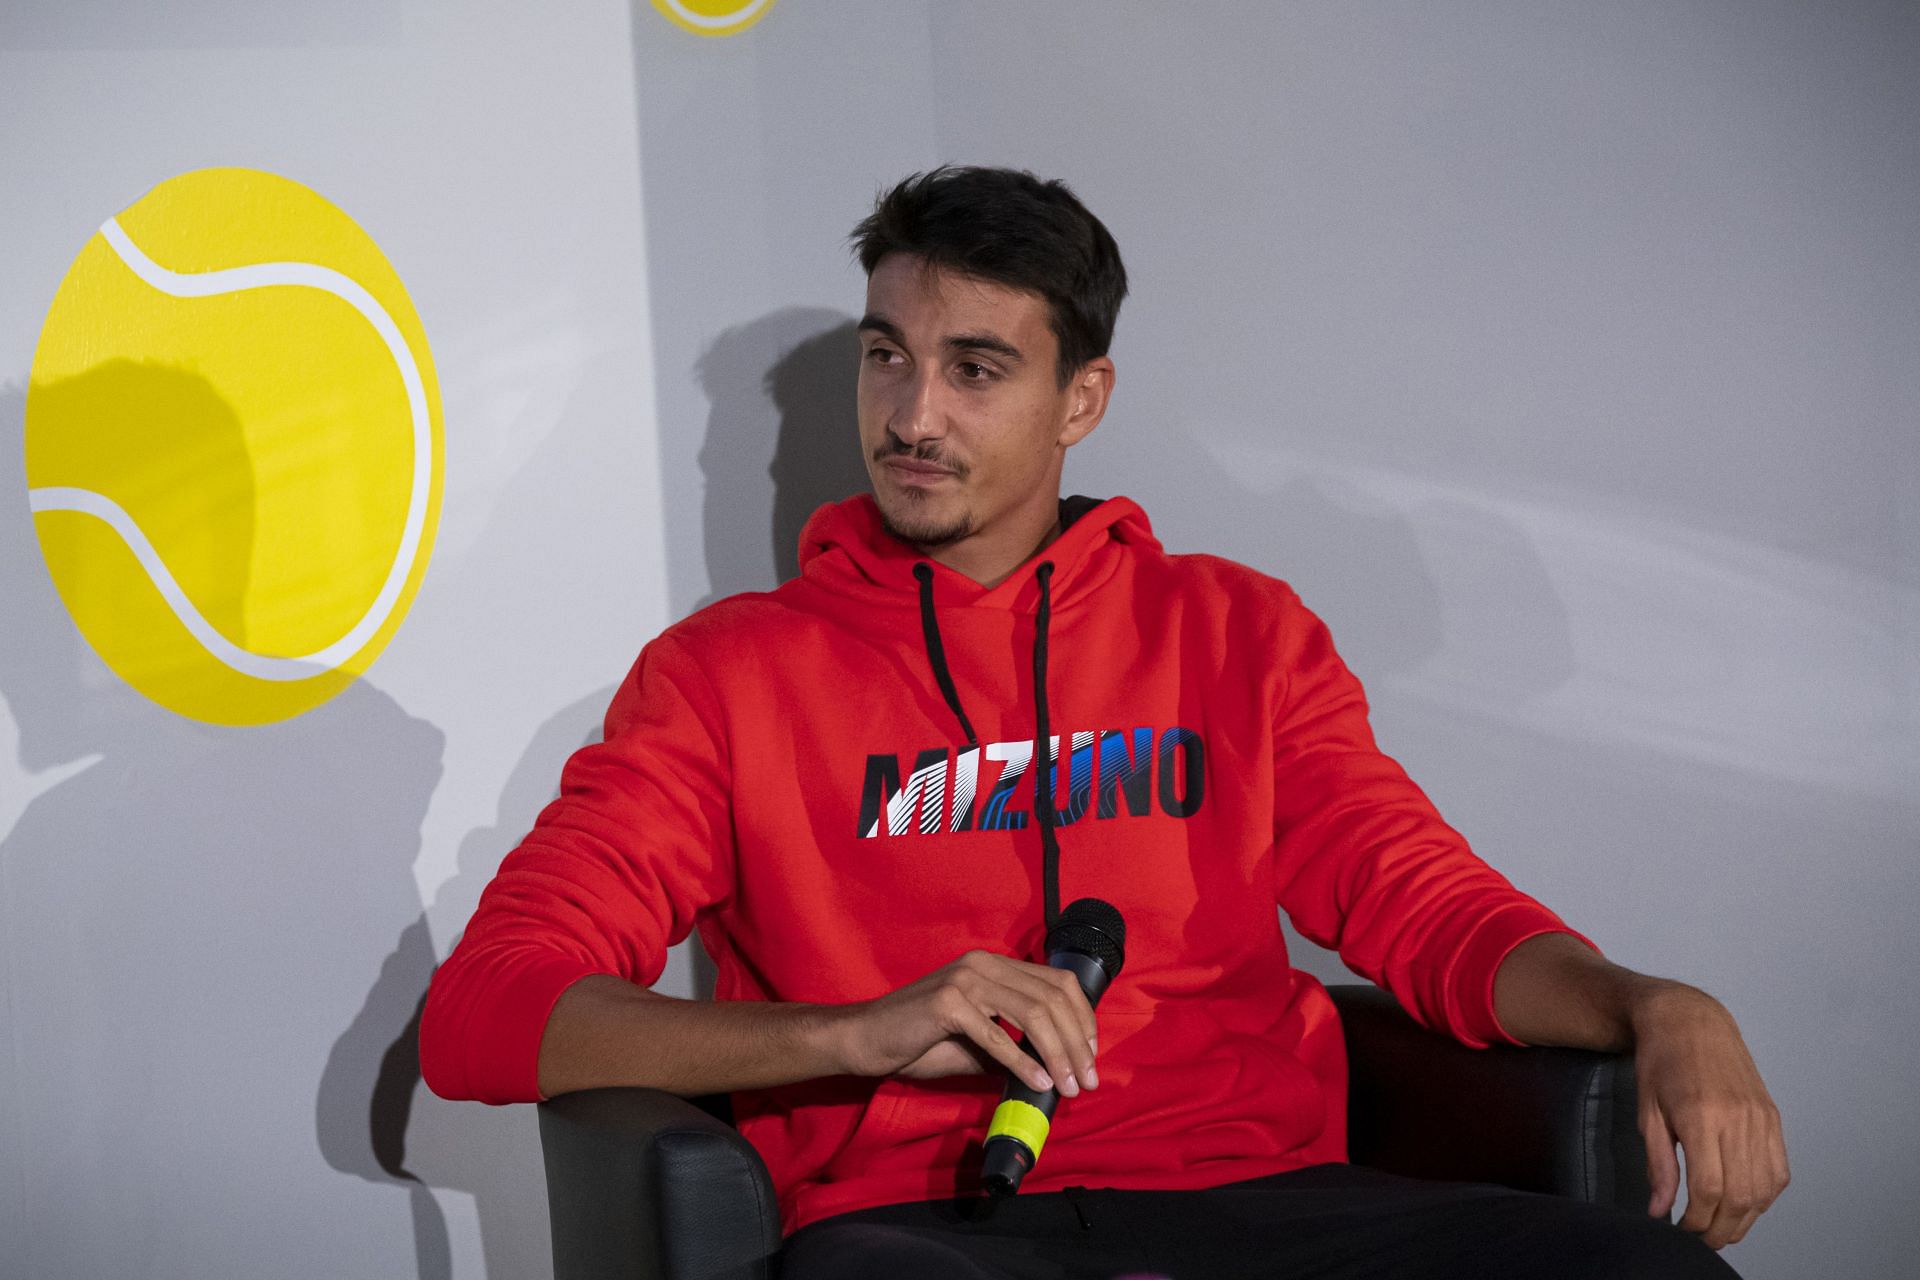 Sonego ahead of the Nitto ATP Finals